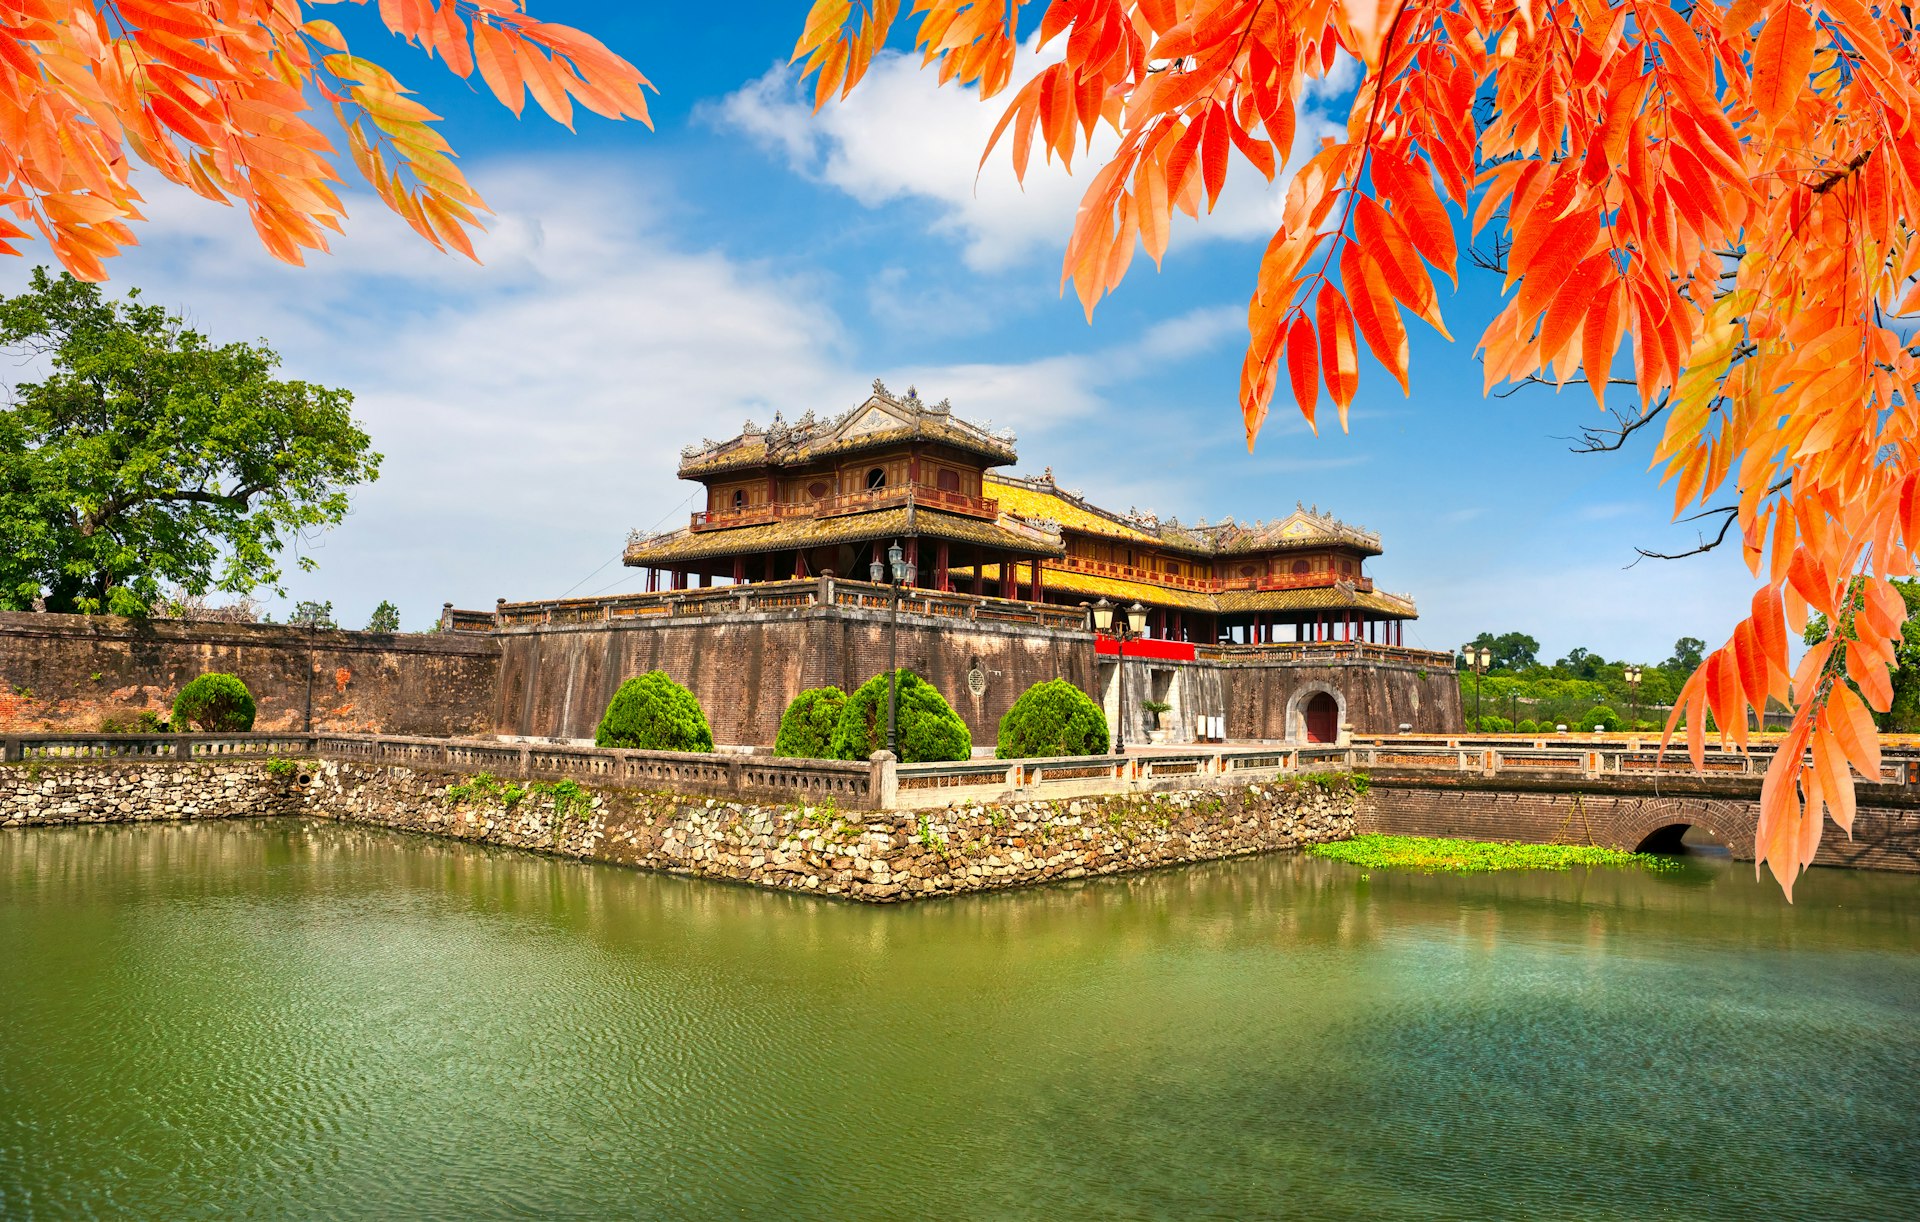 A view of the entrance of the Citadel in Hue, an ancient walled enclosure within the city housing temples and palaces. The stone structure has a moat around it, and the image is framed by red leaves of a nearby tree.